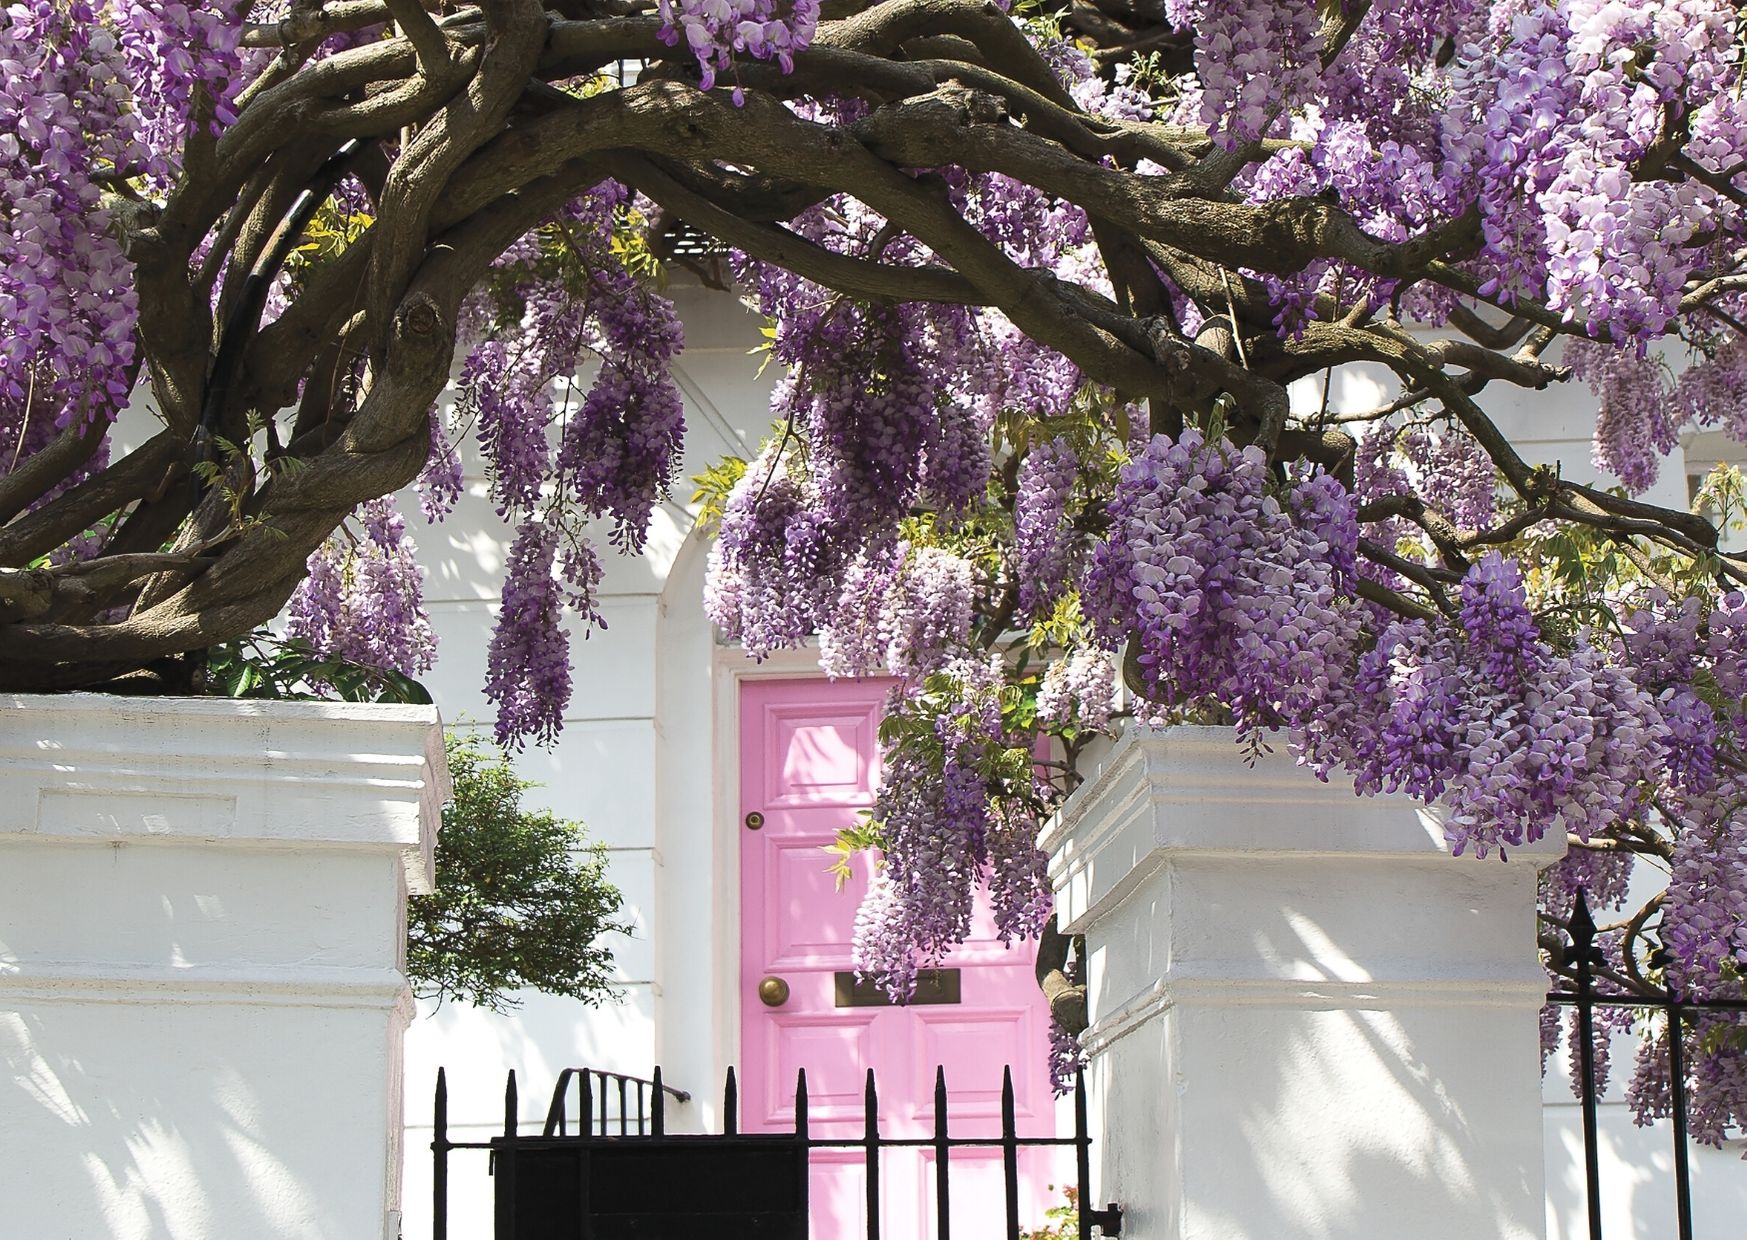 The Best Spots in London for Wisteria